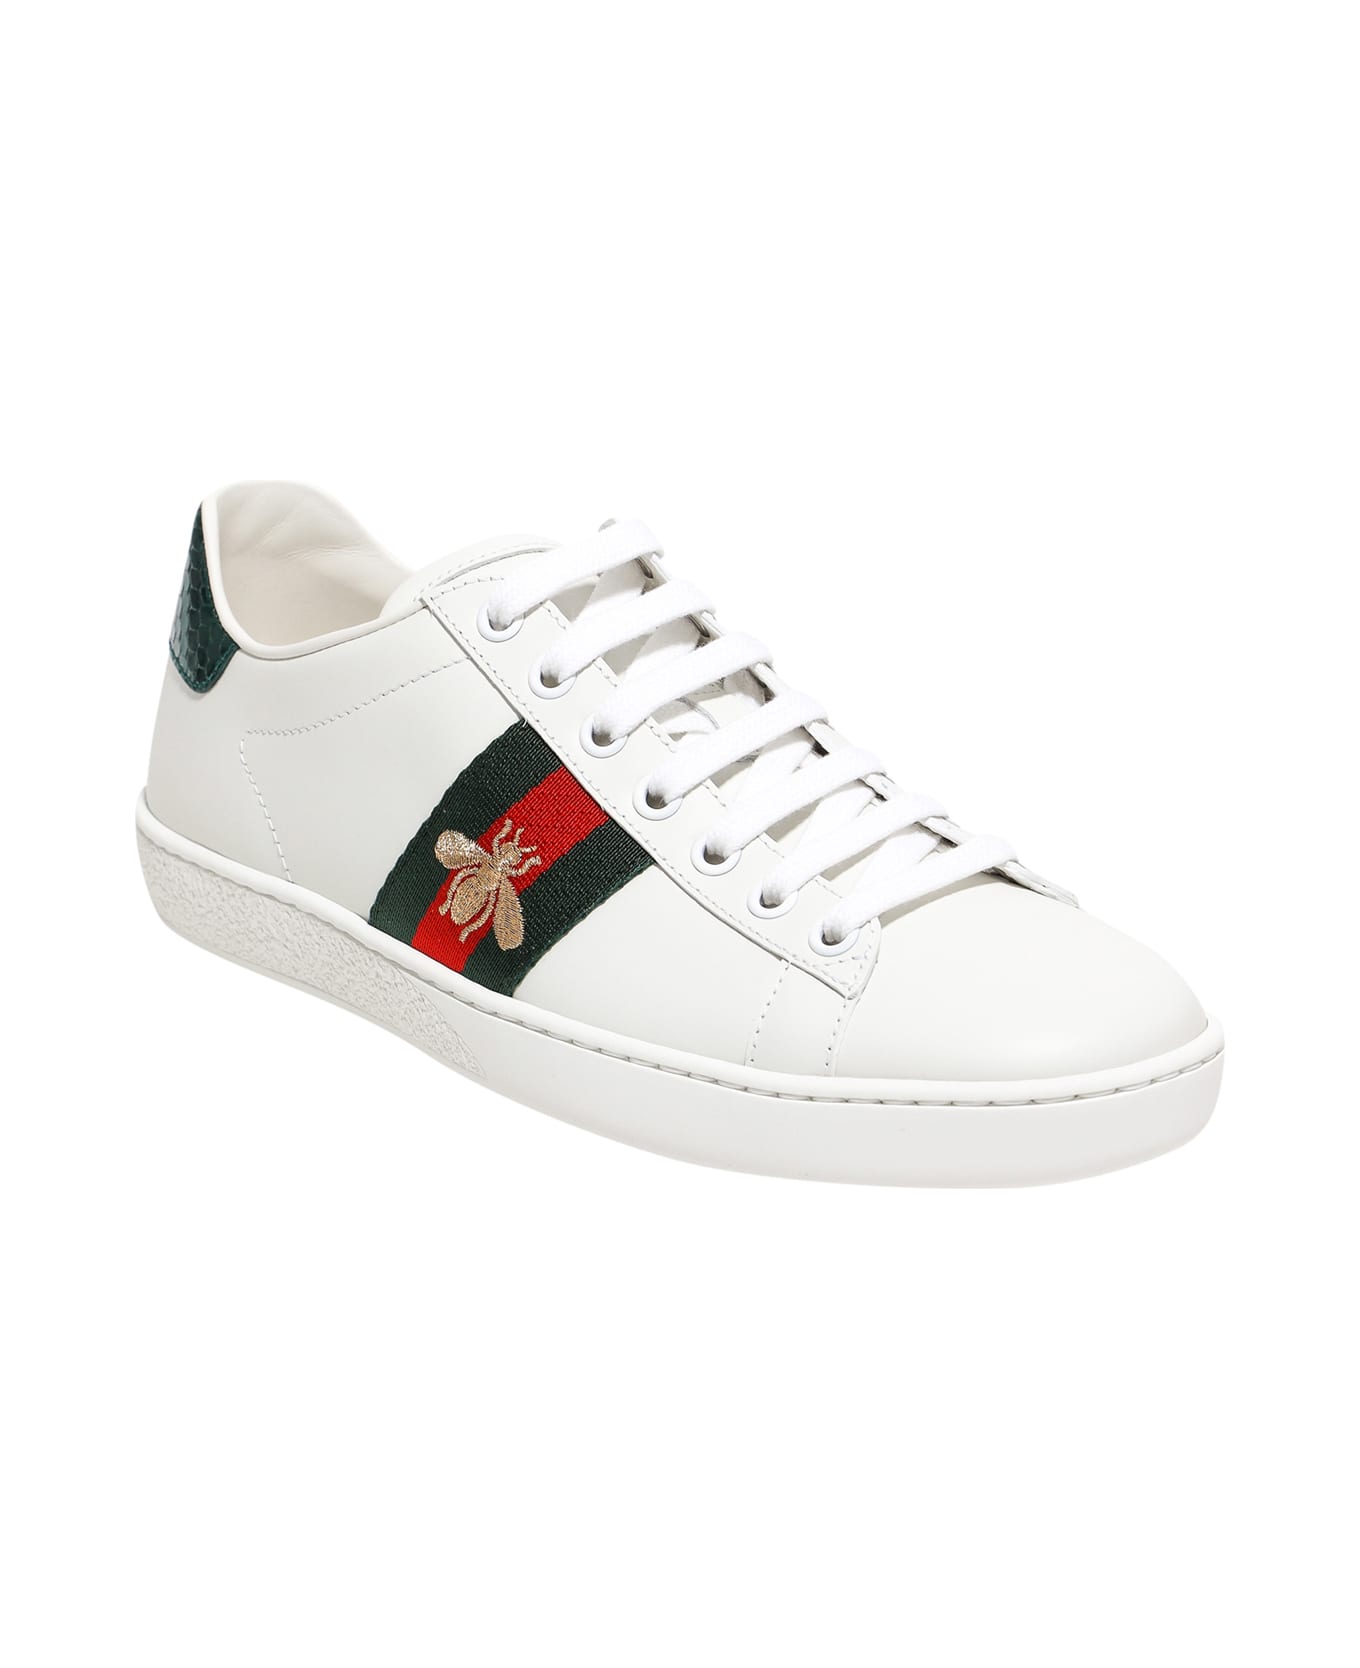 Gucci 'ace' Sneakers - White